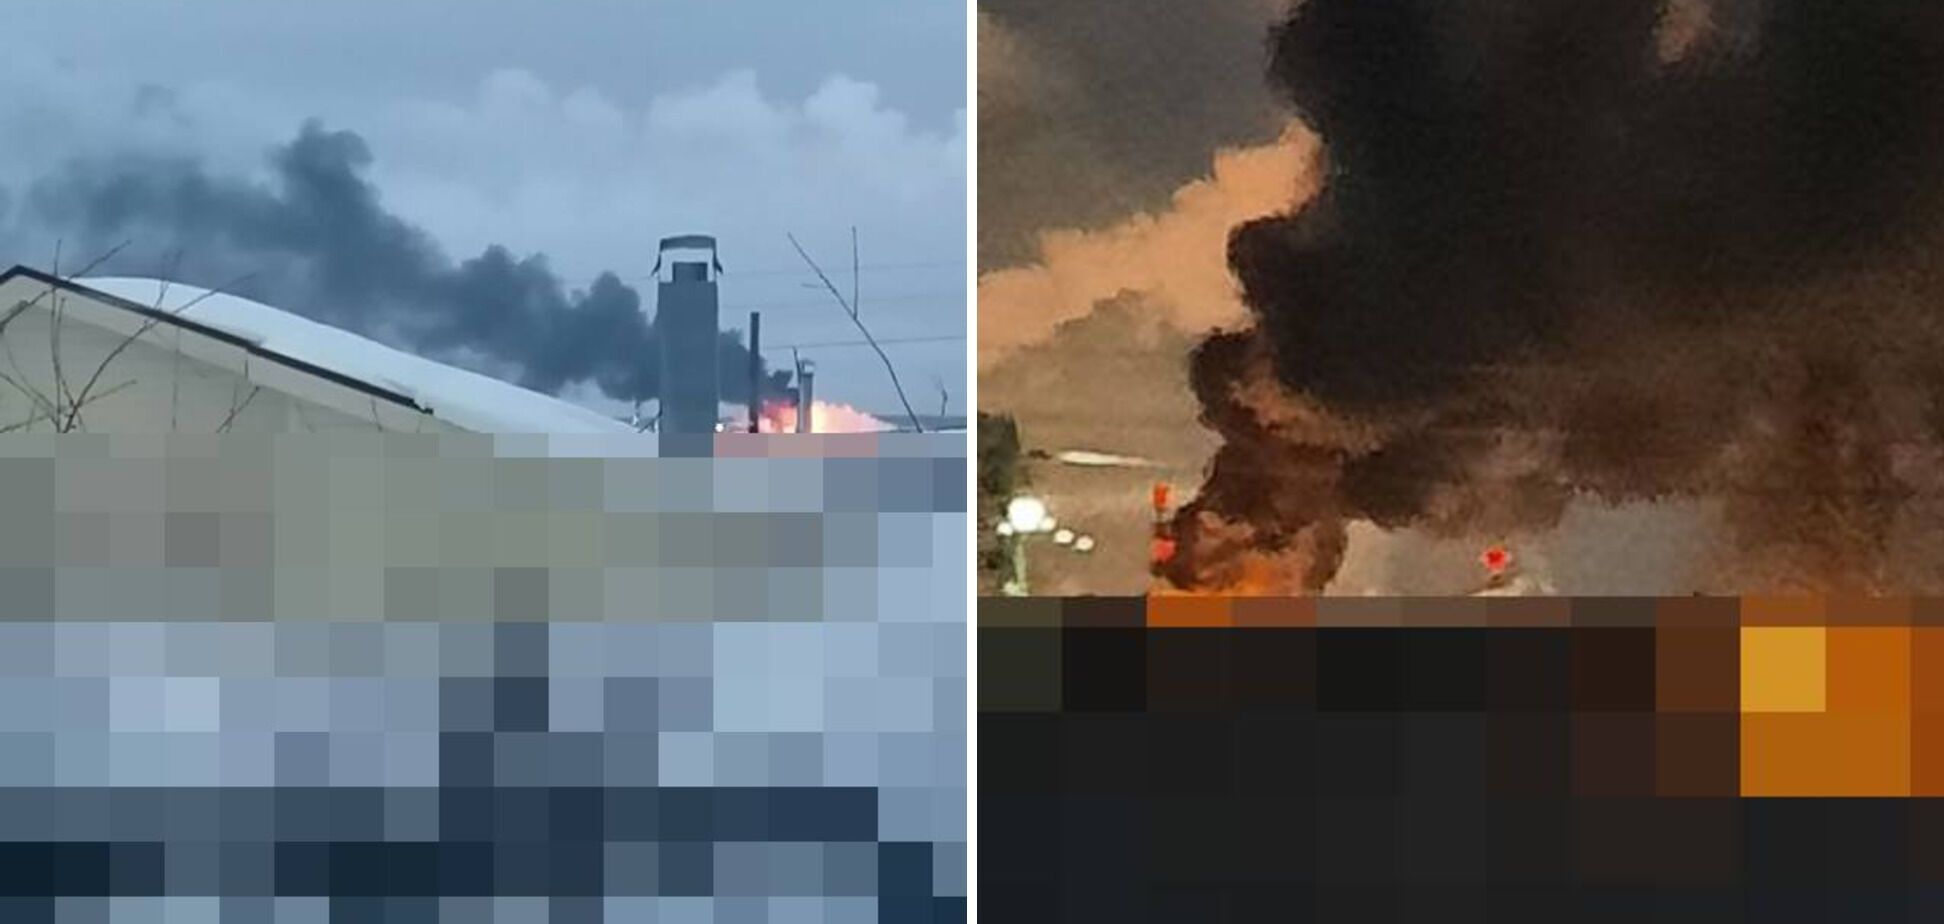 A pillar of fire and black smoke rose: photos of a powerful fire at the Lukoil refinery in Russia after a drone attack appeared